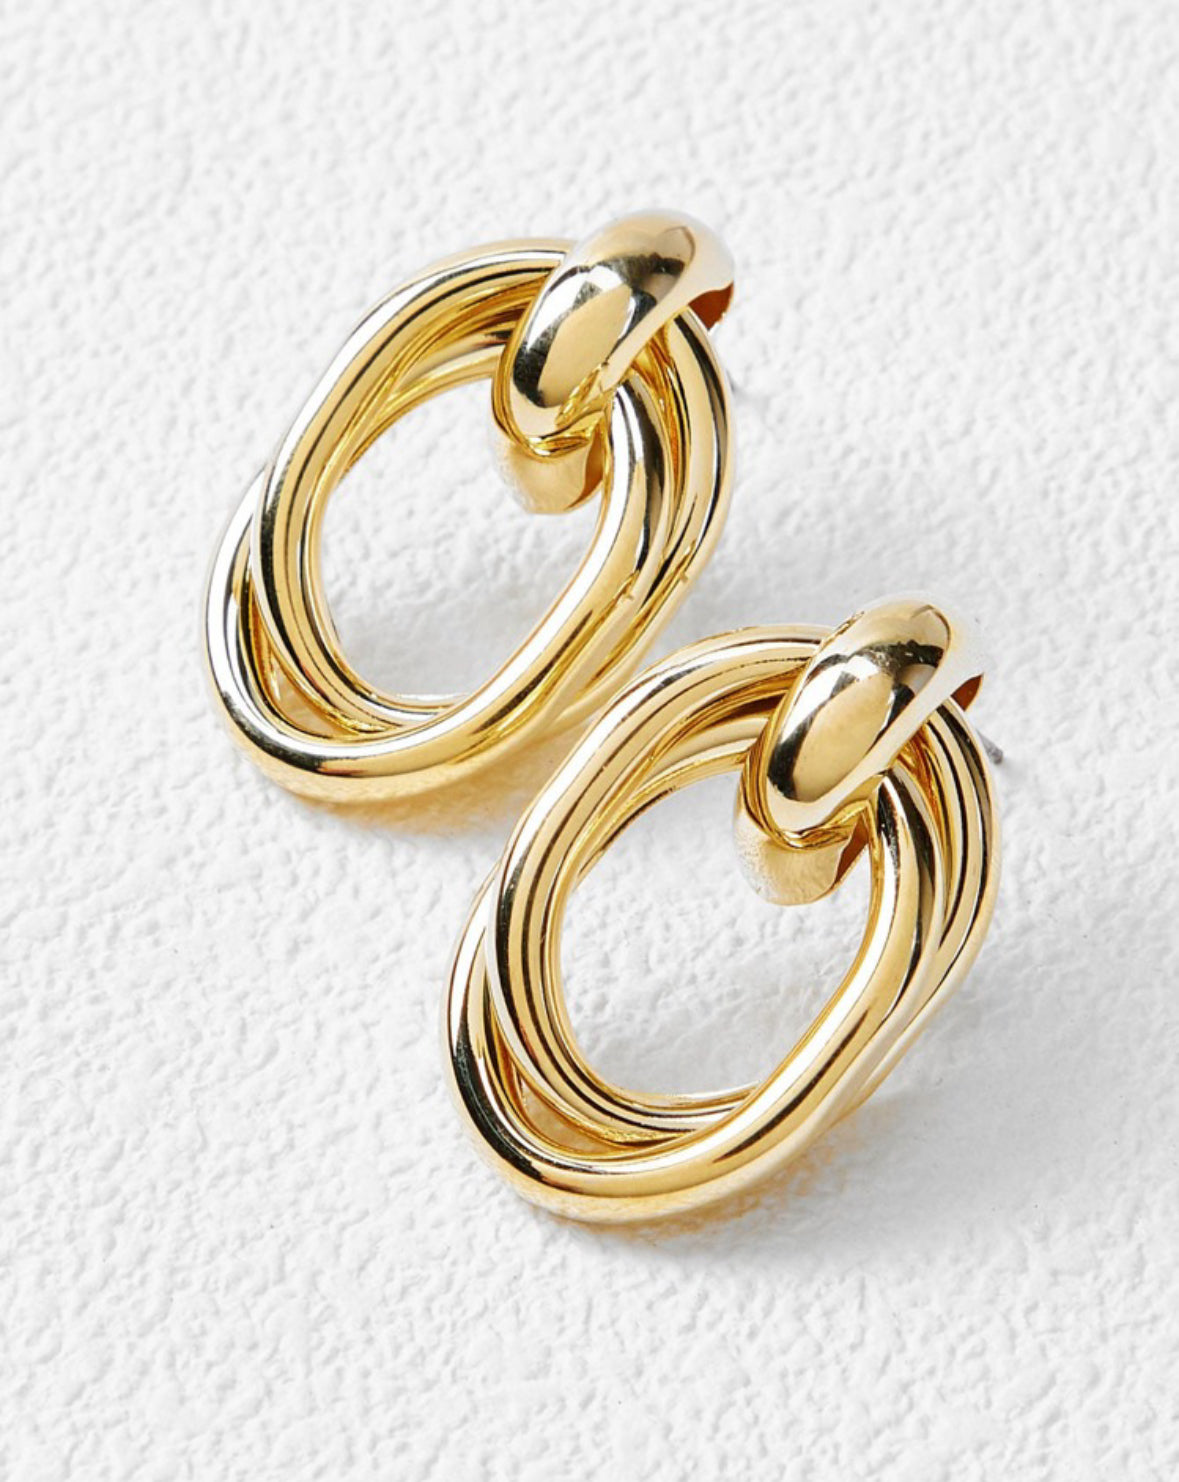 pair of gold plated earring on the white paper